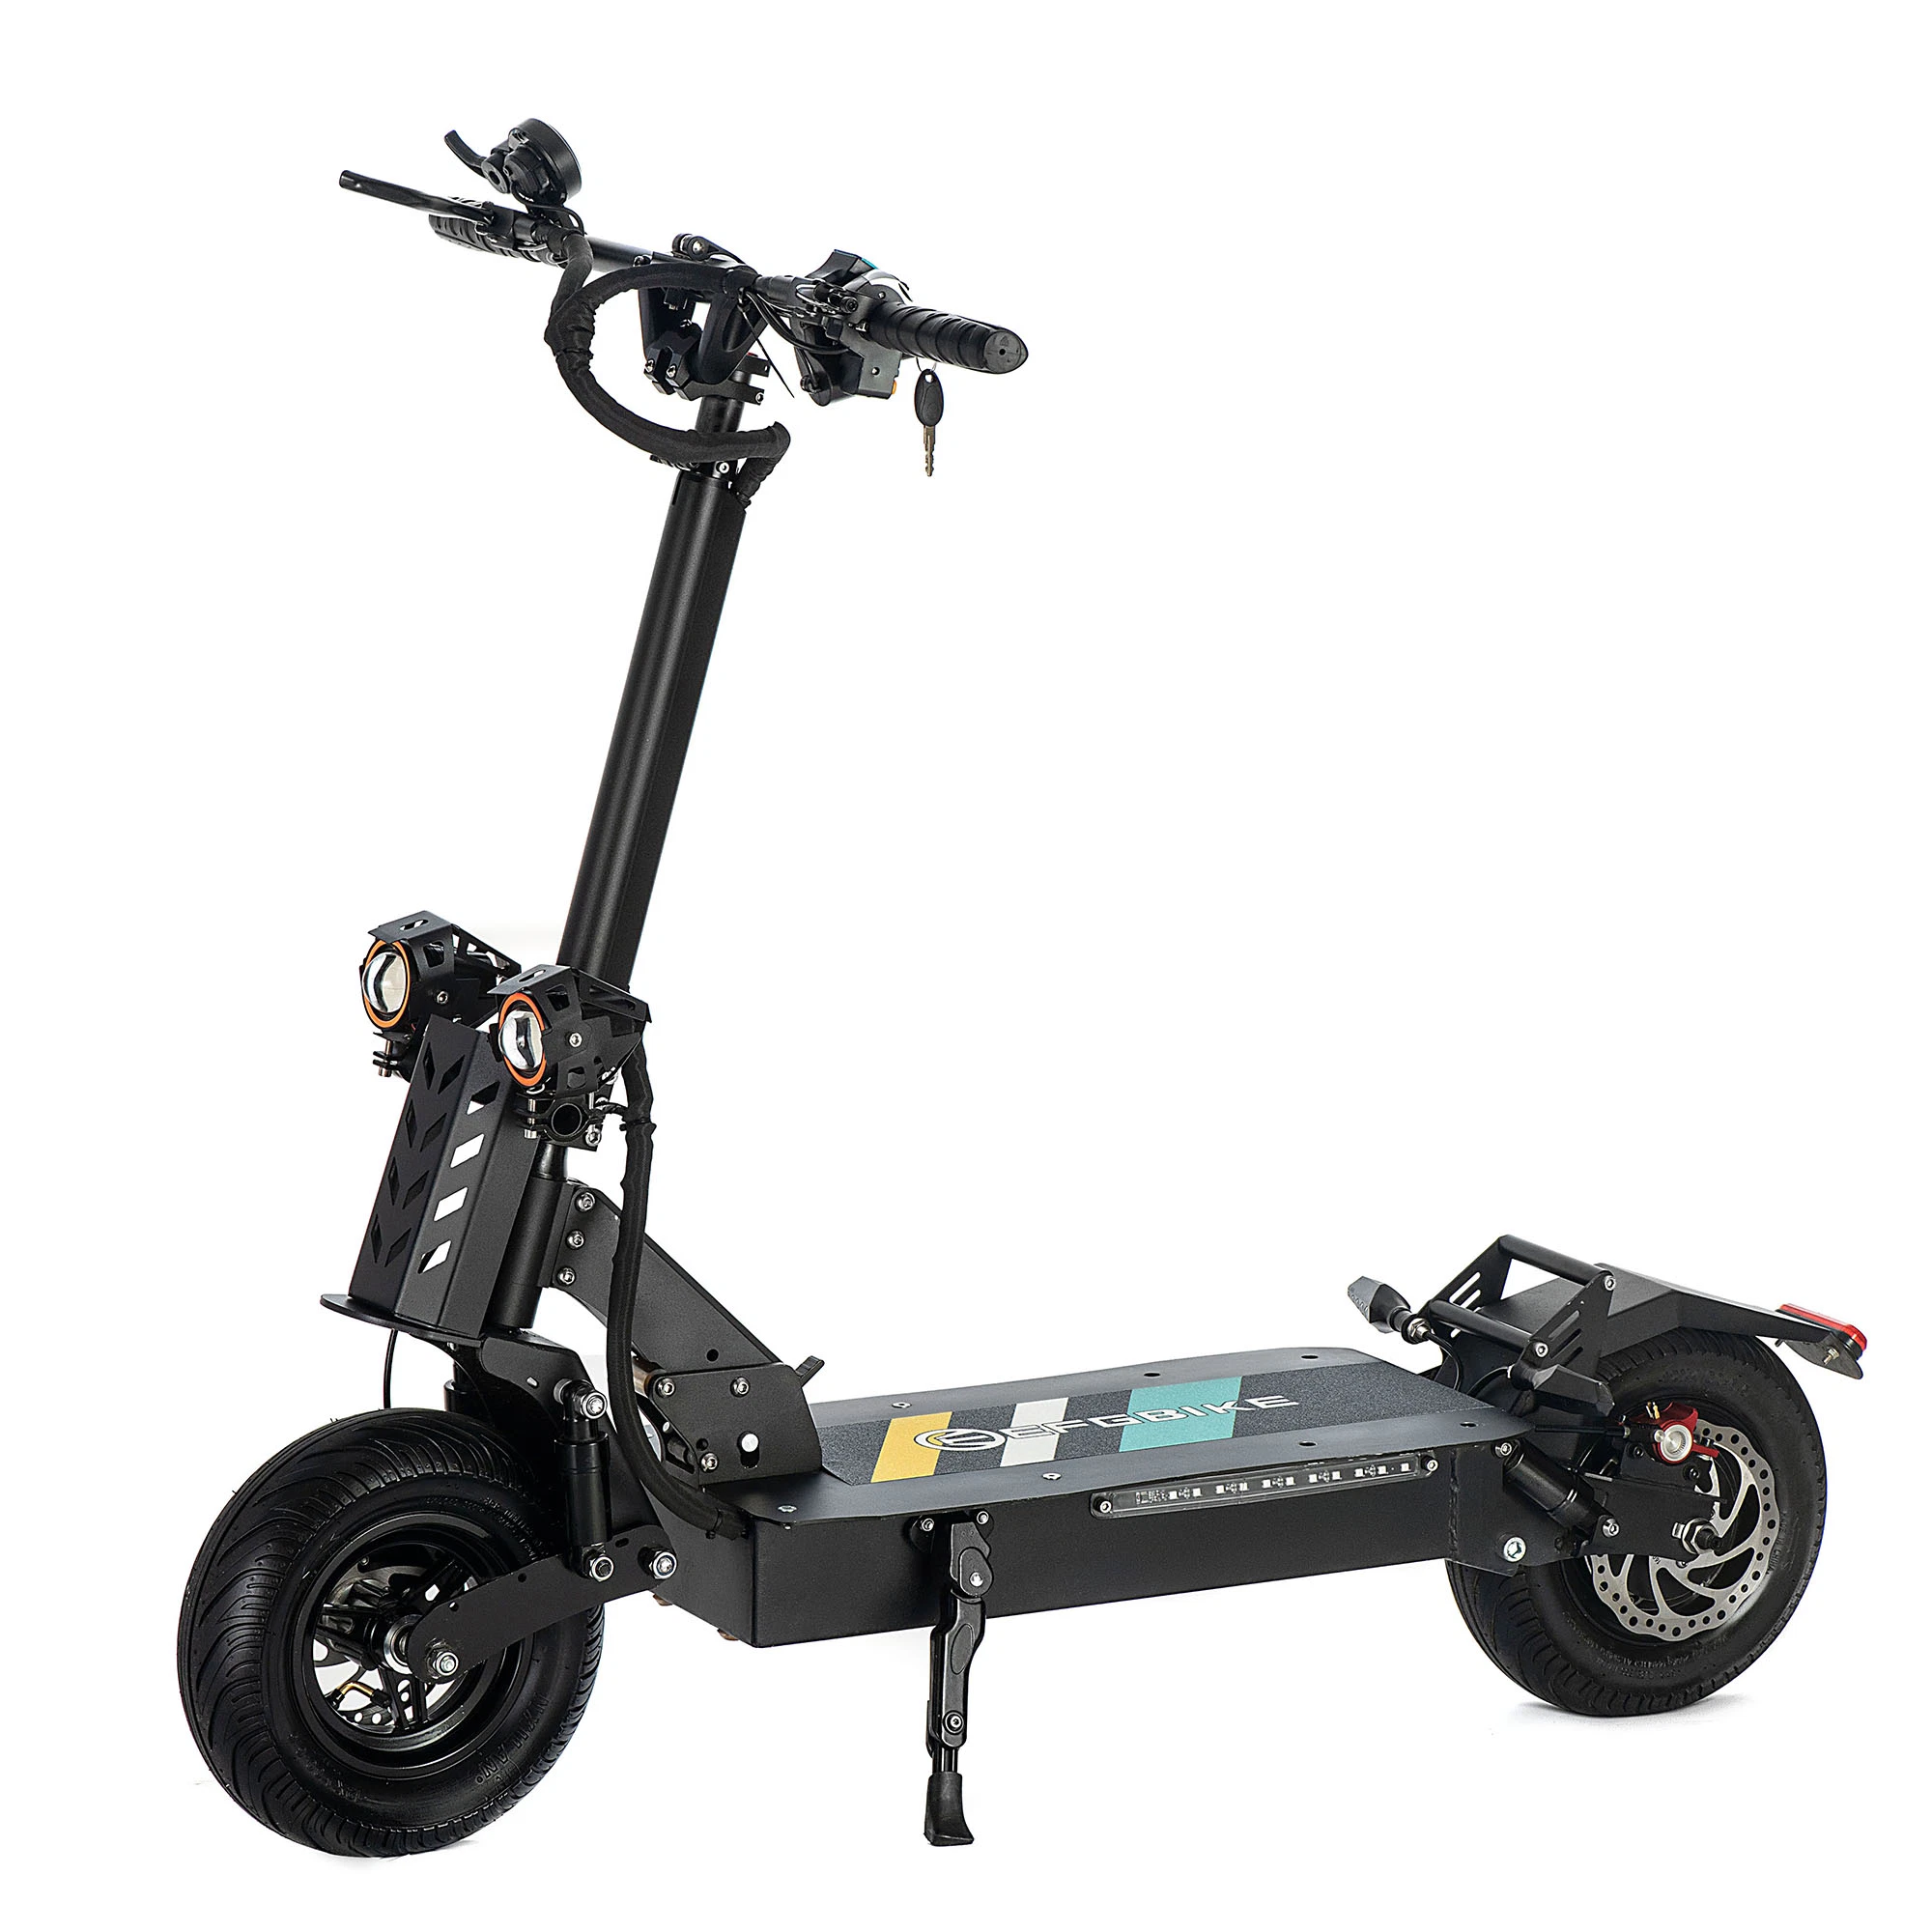 EFGTEK S6 Adult Scooter Electric 12 Inch Two Wheels Folding Scooters 60V 1600W Brushless Motor off Road Electric Scooter